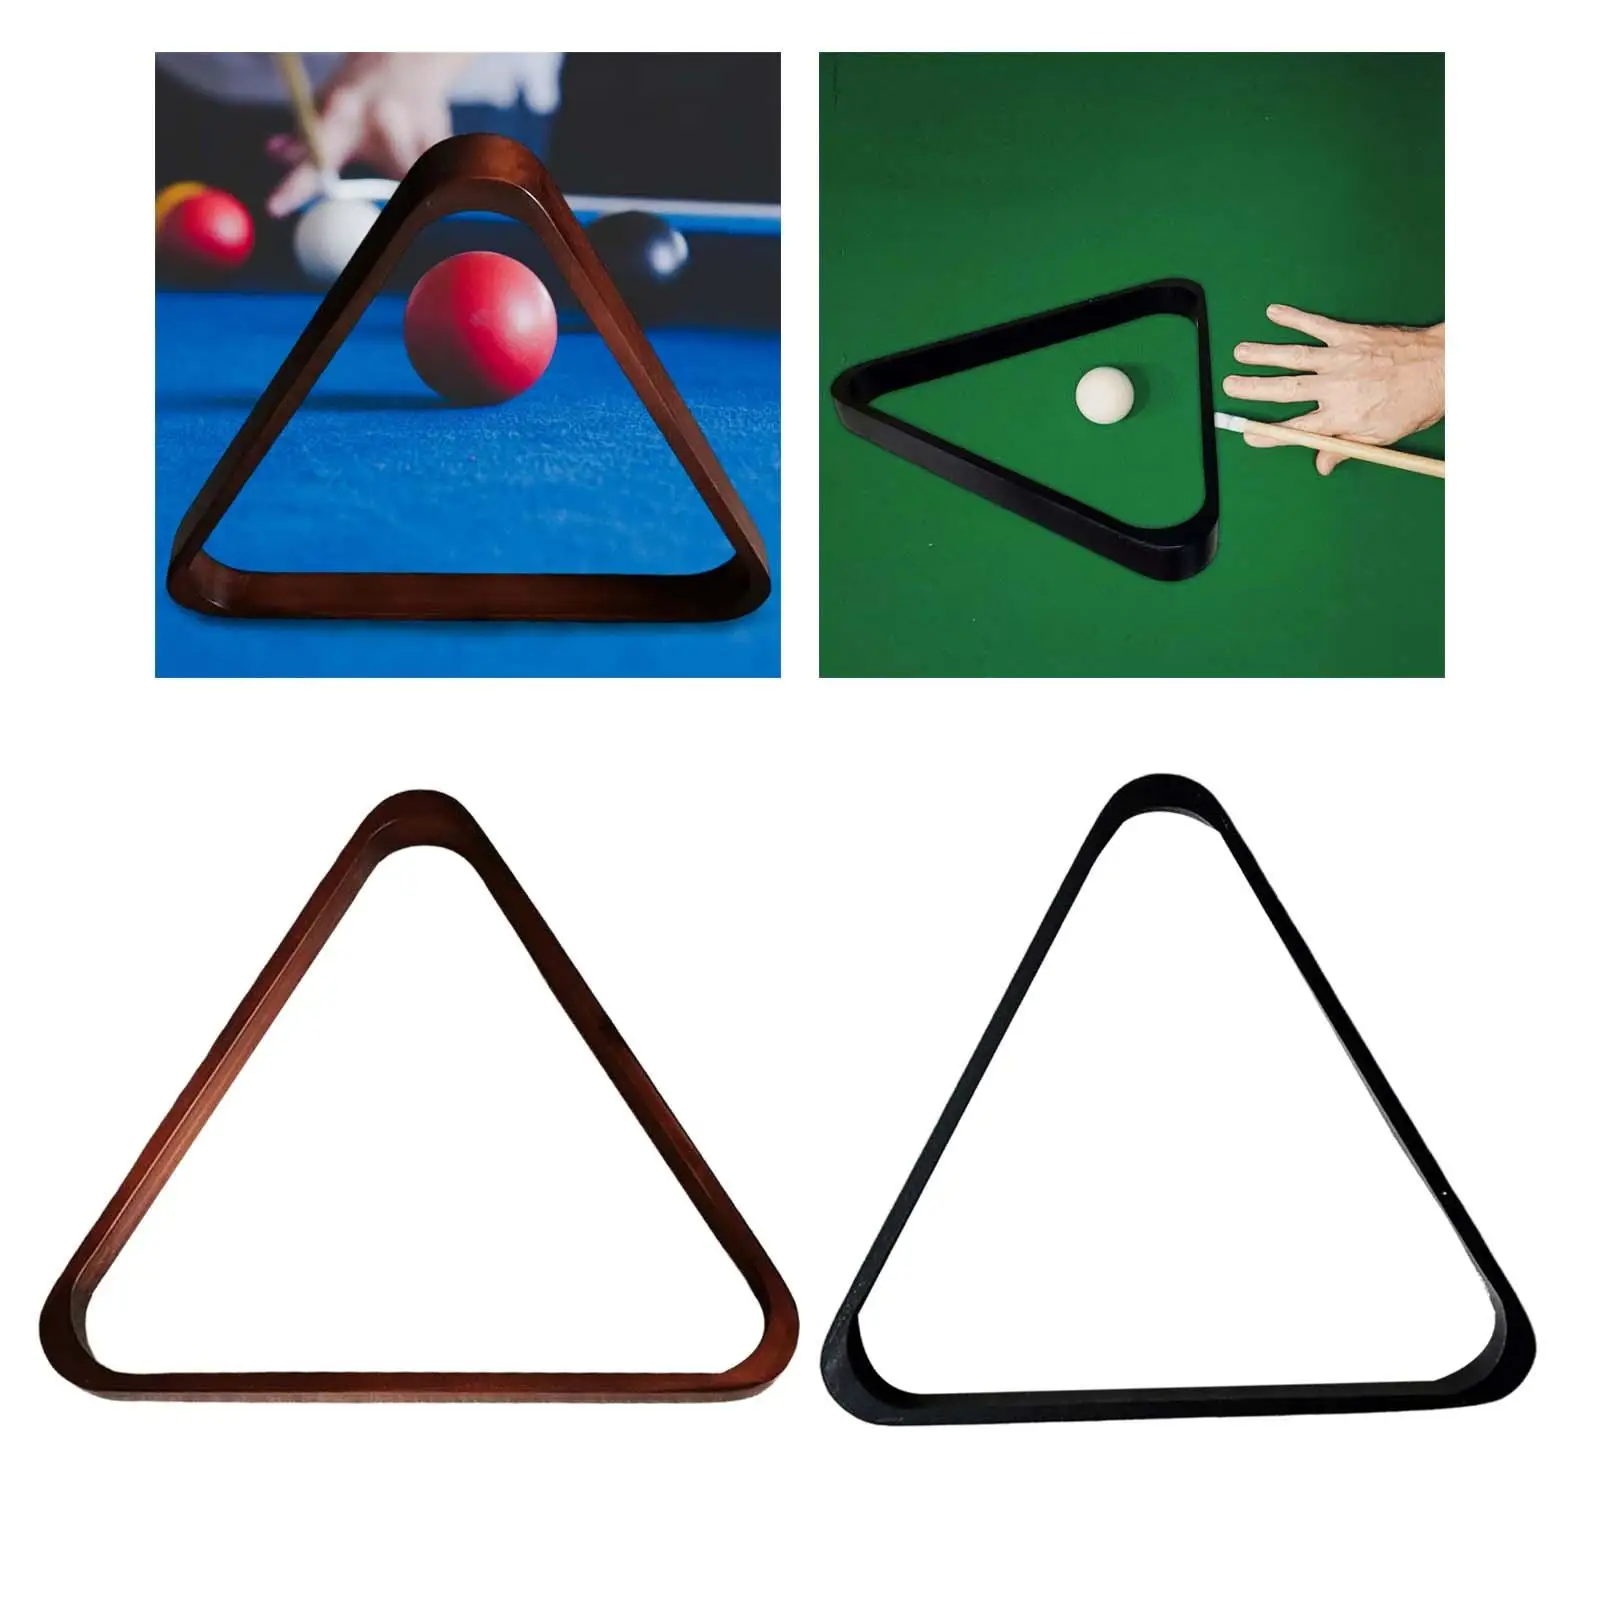 Flat Billiard Triangle Rack Supplies Table Rack Accessories Tripod Pool 8 Balls Ball Holder for Sports Snooker Positioning